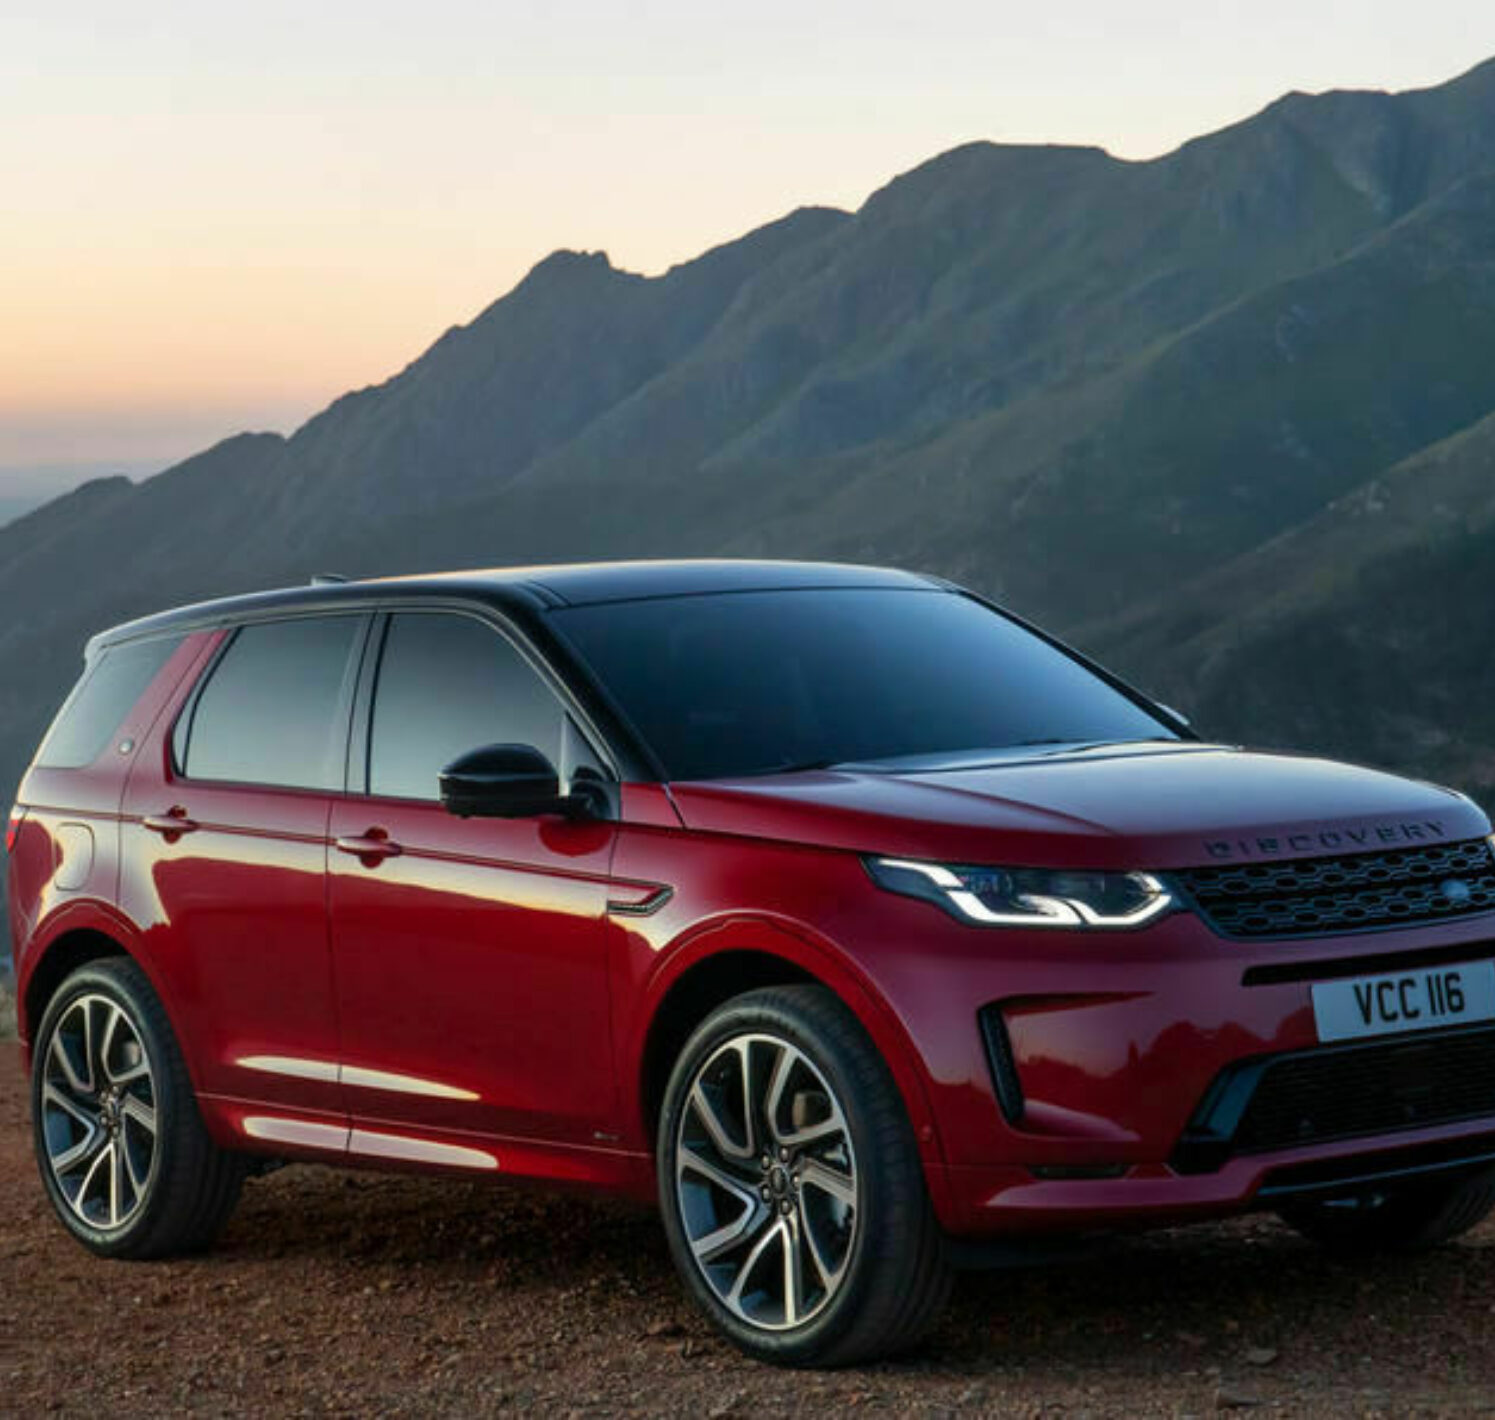 https://autofilter.sk/assets/images/discovery-sport/gallery/79-land-rover-discovery-sport-2019-official-pics-static-front_01-galeria.jpg - obrazok